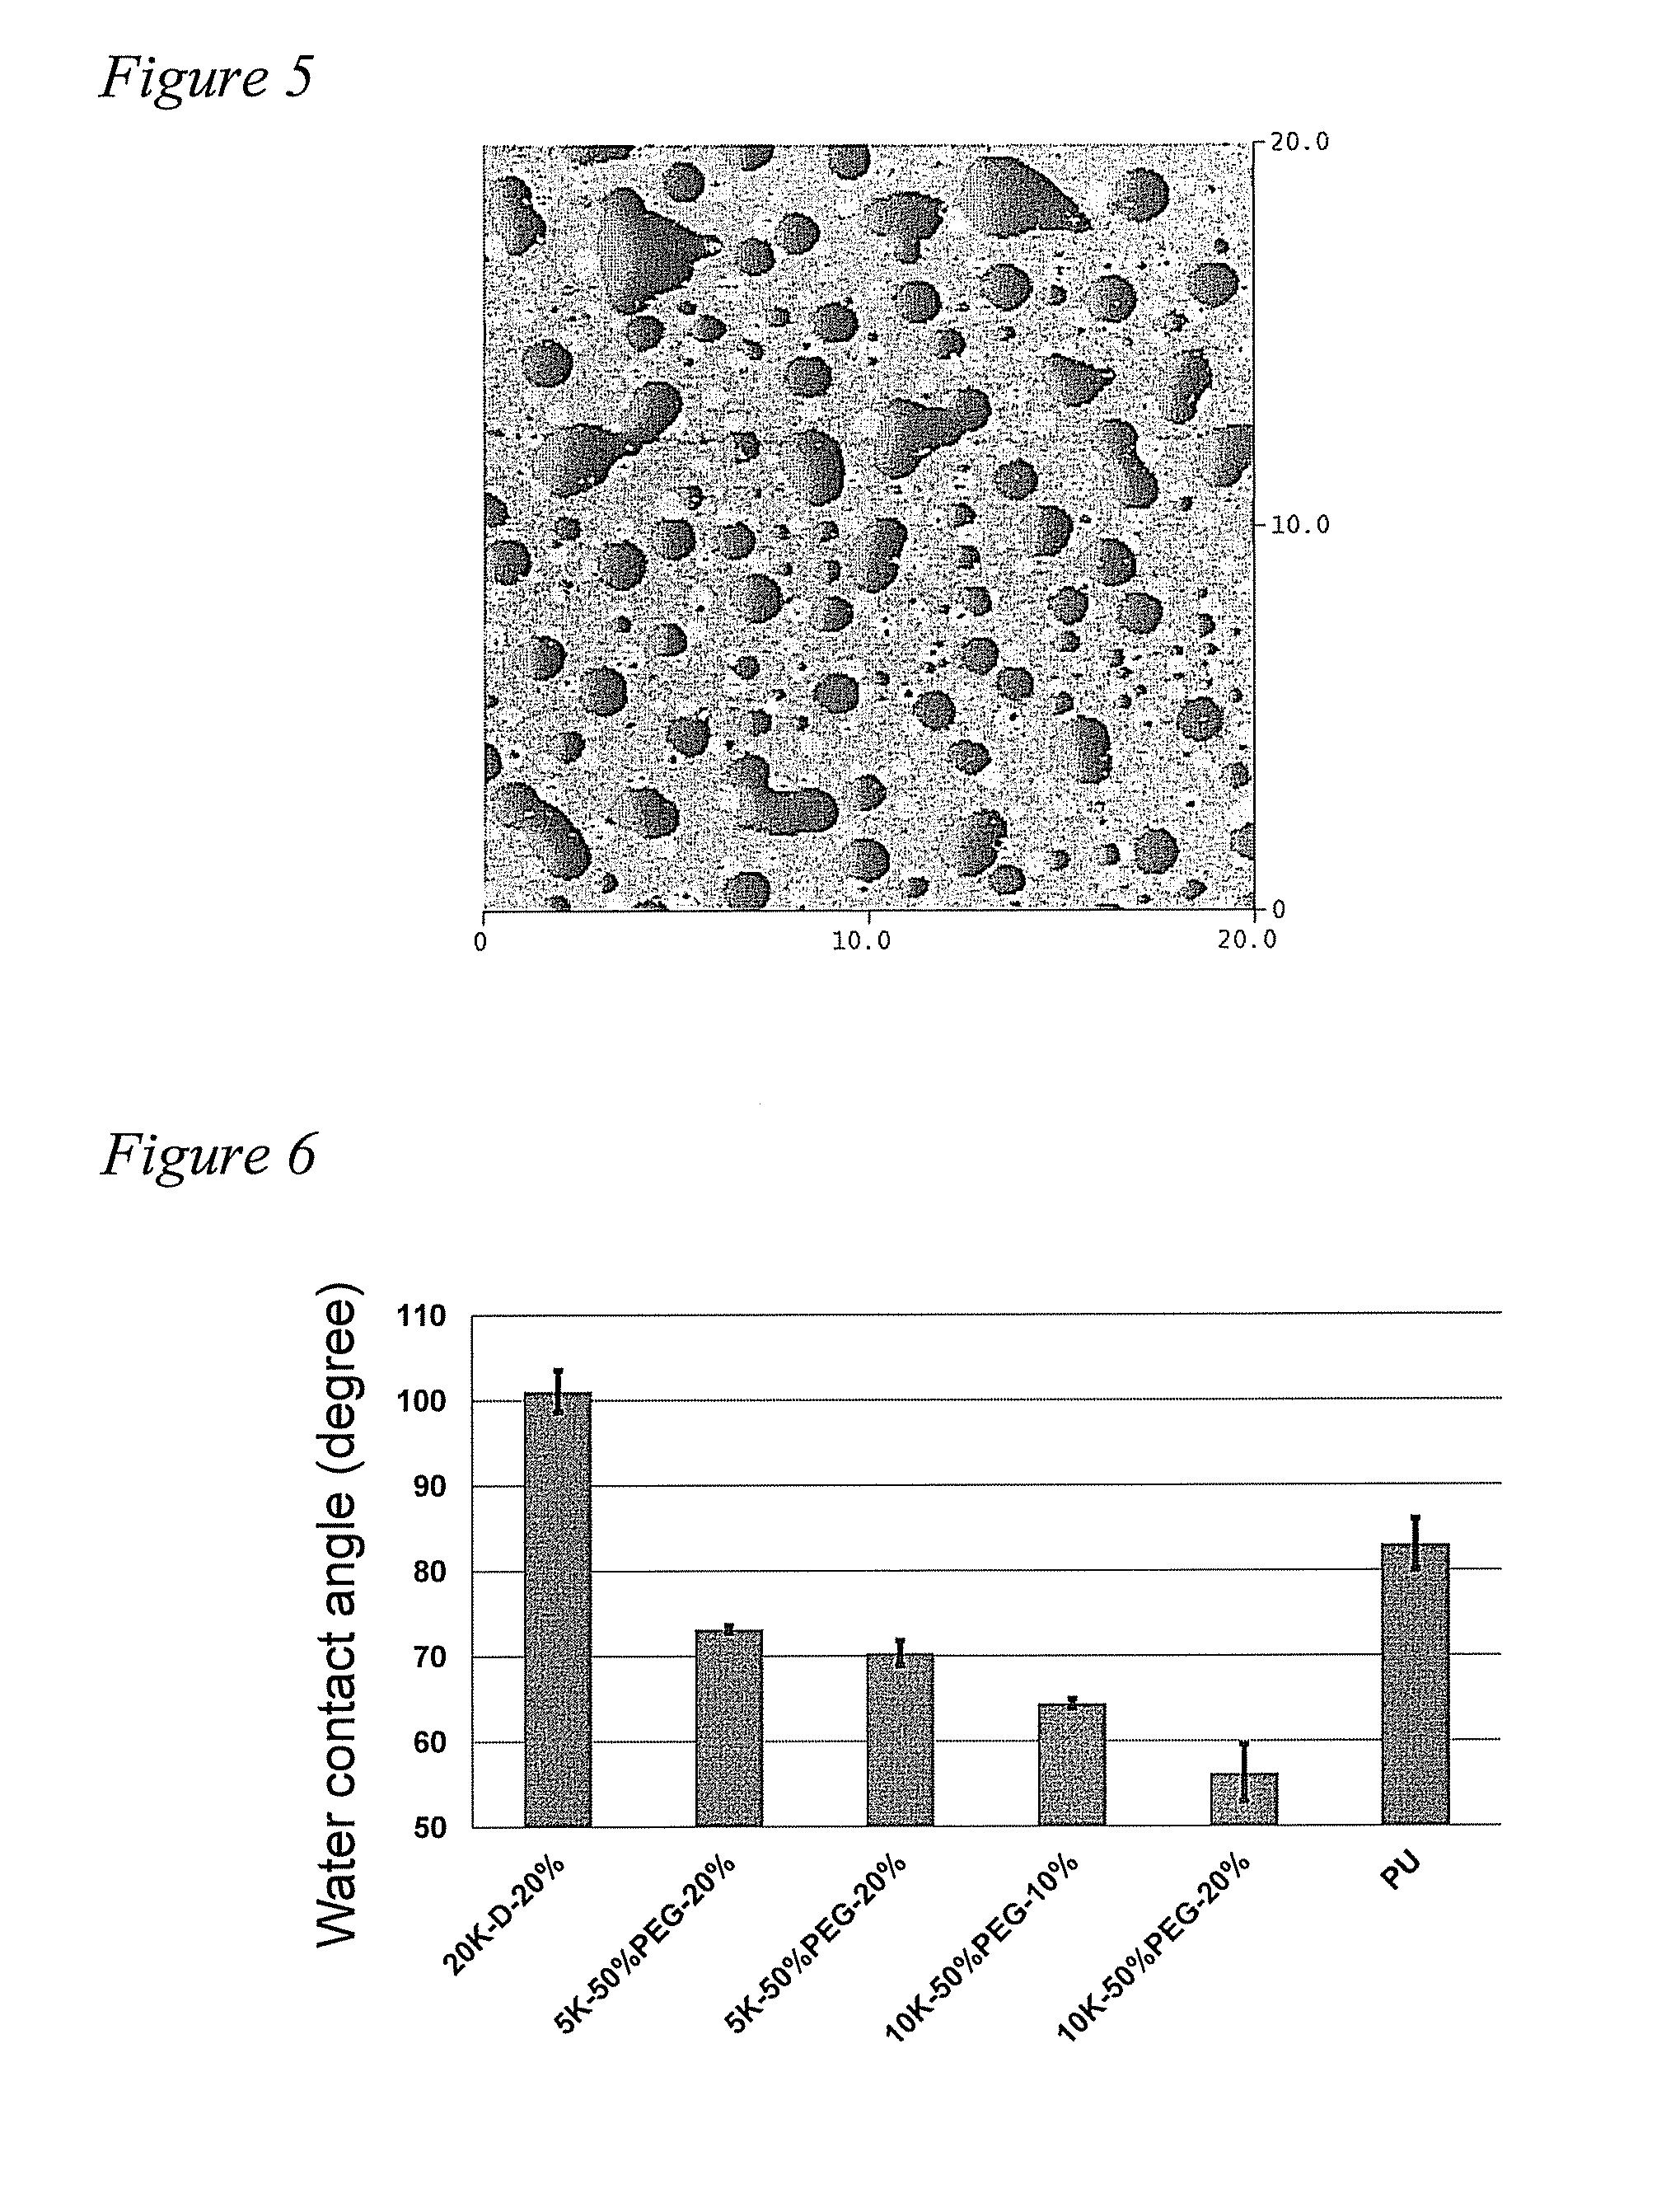 Functionalized silicones with polyalkylene oxide side chains